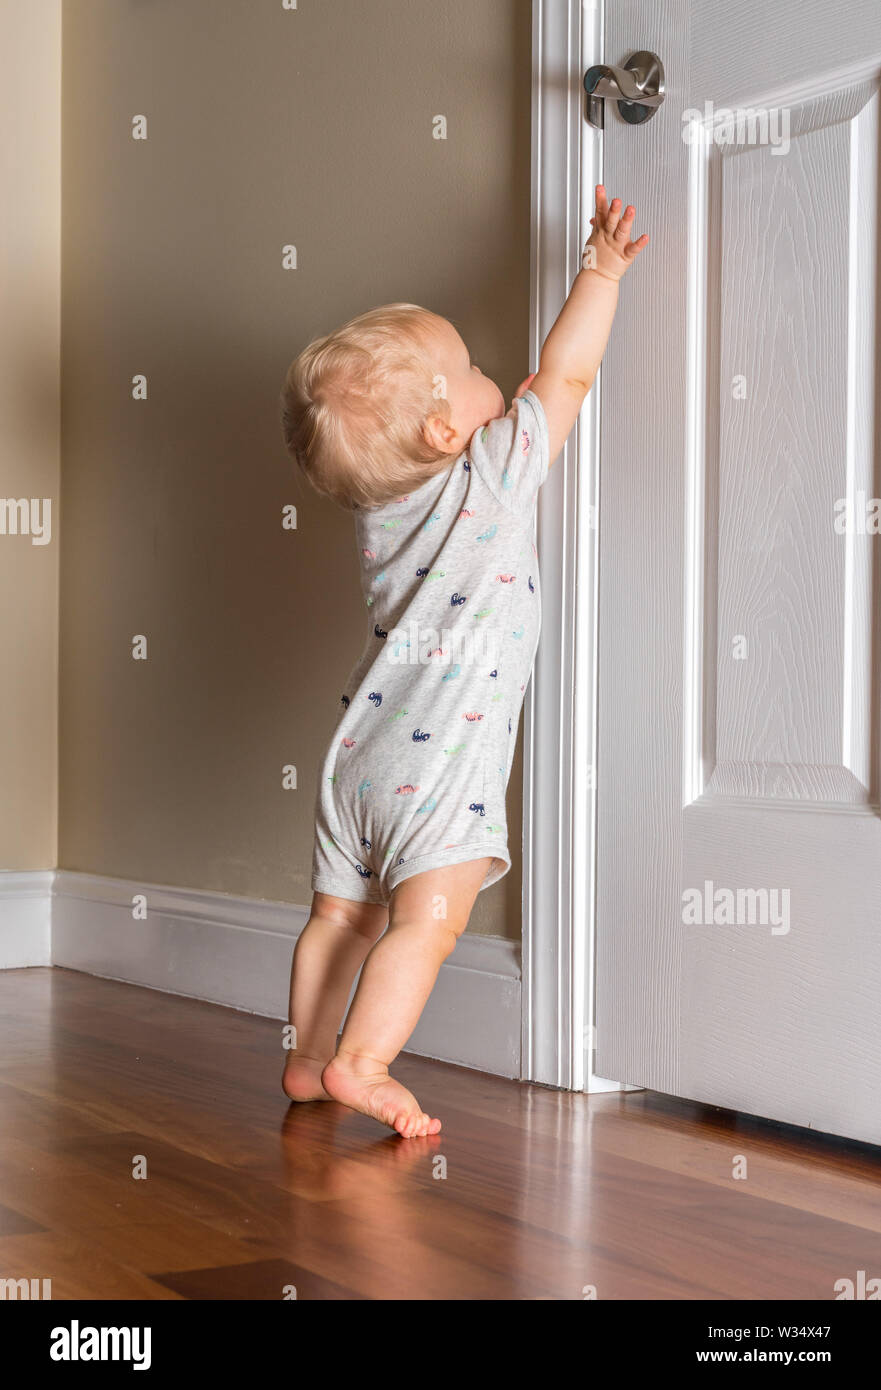 Young baby just able to walk reaching up for the door handle on wooden floor Stock Photo